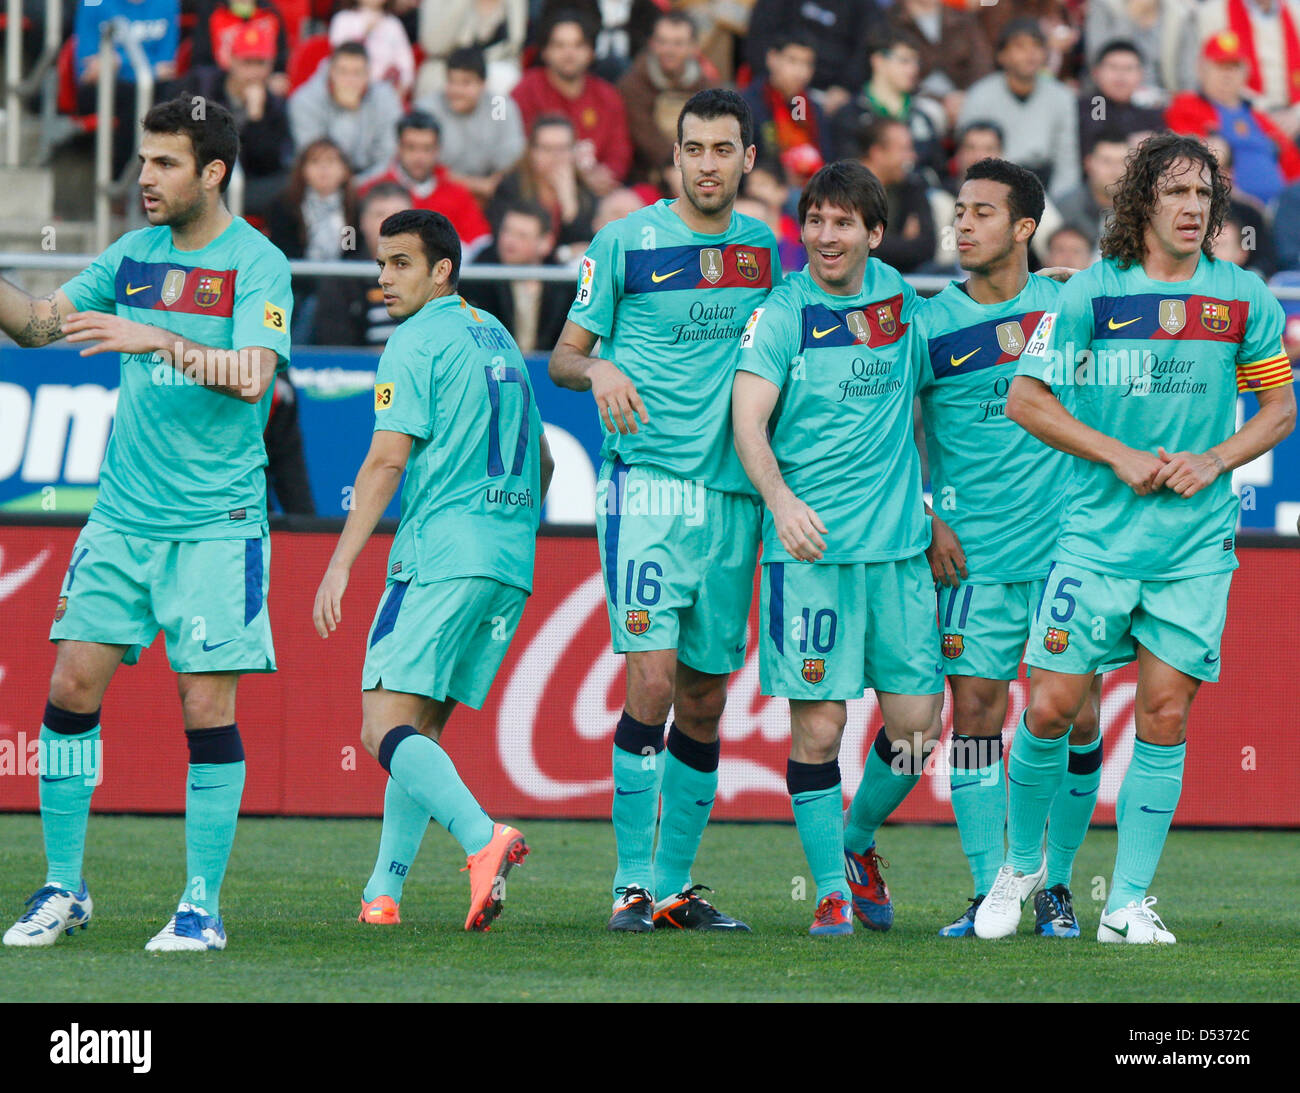 Barcelona´s soccer player Lionel Messi (3rd right) and teammates celebrate after scoring a goal during a match Stock Photo